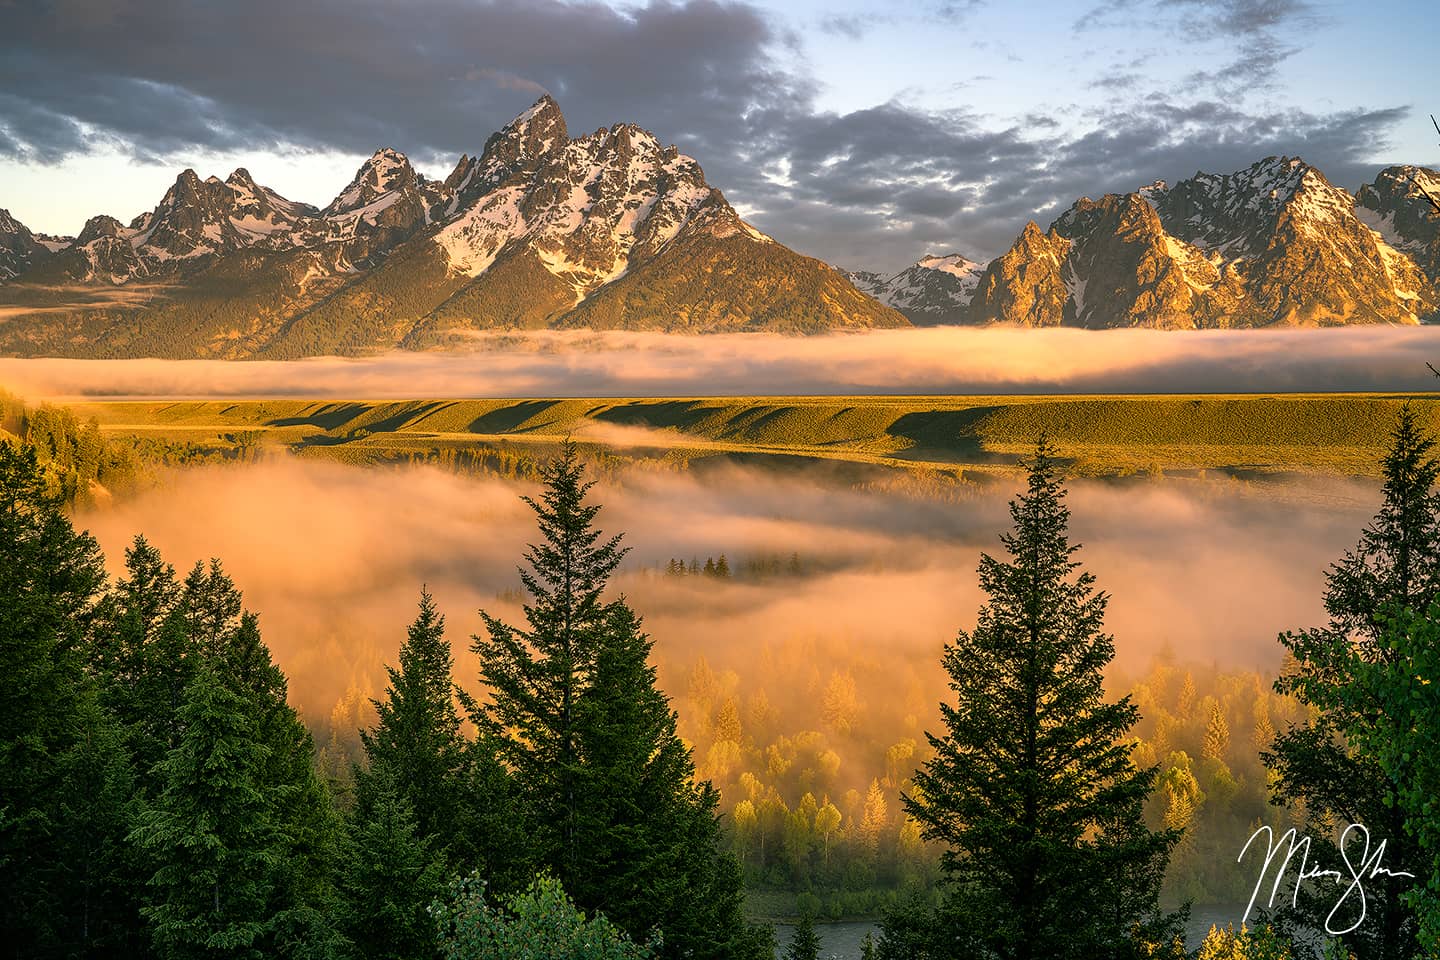 Talk about an epic sunrise! Low hanging fog filled the Snake River Valley below the Snake River Overlook that Ansel Adams made famous so many years ago. As warm light flooded the fog and valley below, the mountains rose magnificently in the distance. The Grand Teton National Park is full of amazing vantage points like this!